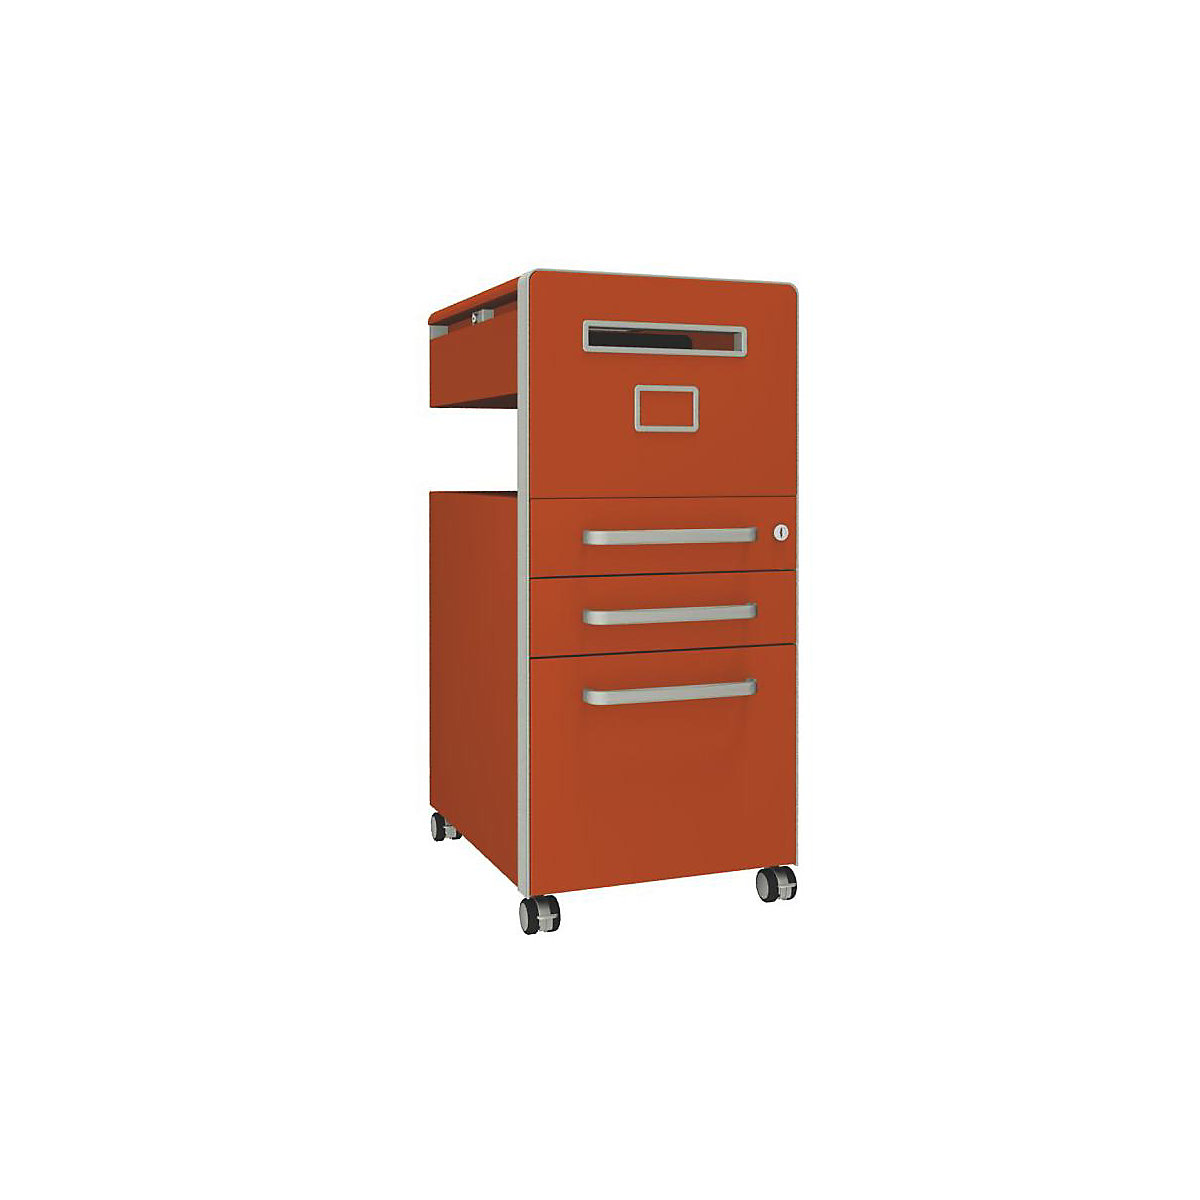 Bite™ pedestal furniture, with 1 whiteboard, opens on the right side – BISLEY, with 2 universal drawers, 1 suspension file drawer, orange-23